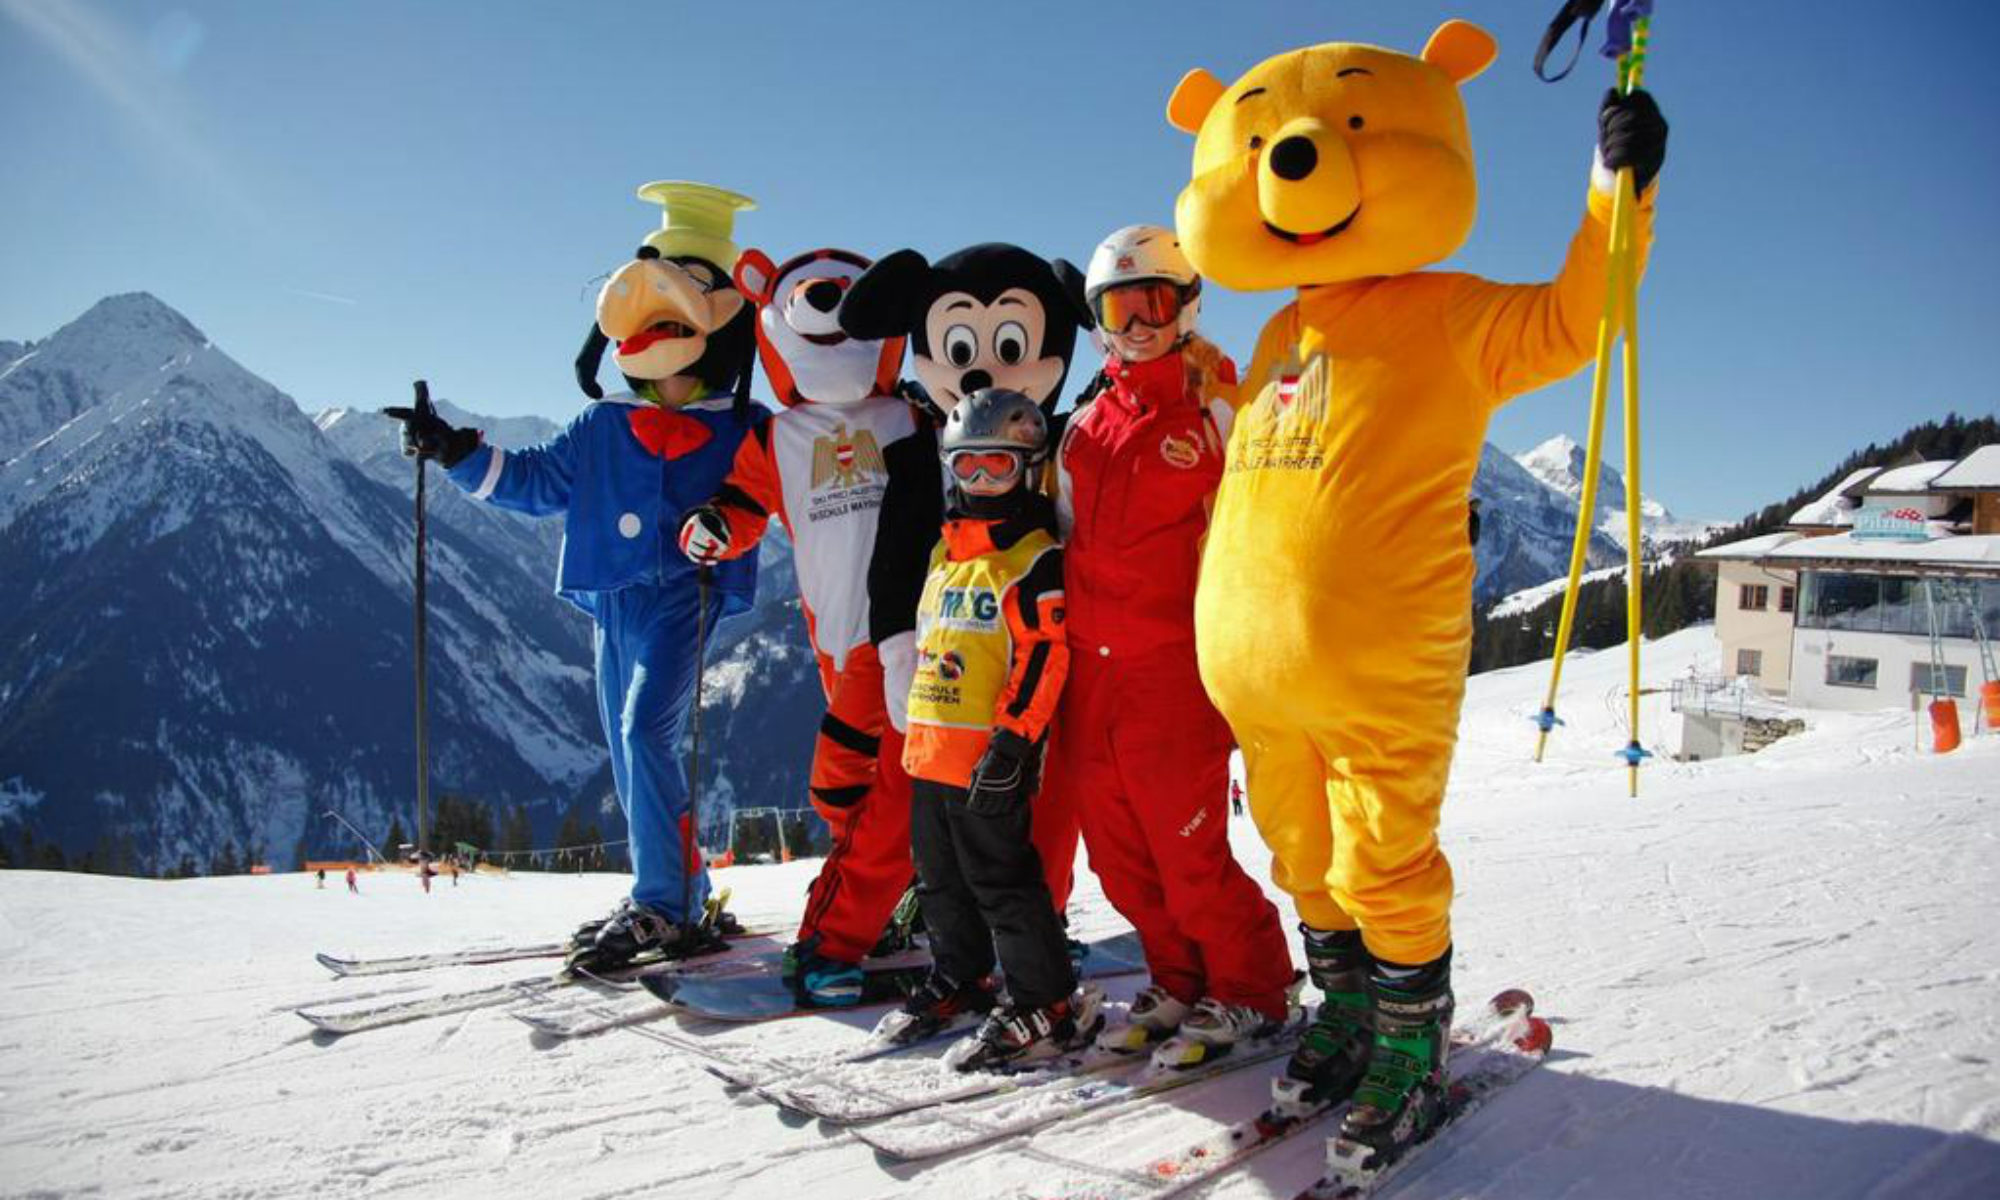 The mascots of Mayrhofen’s ski schools with a ski instructor and child.